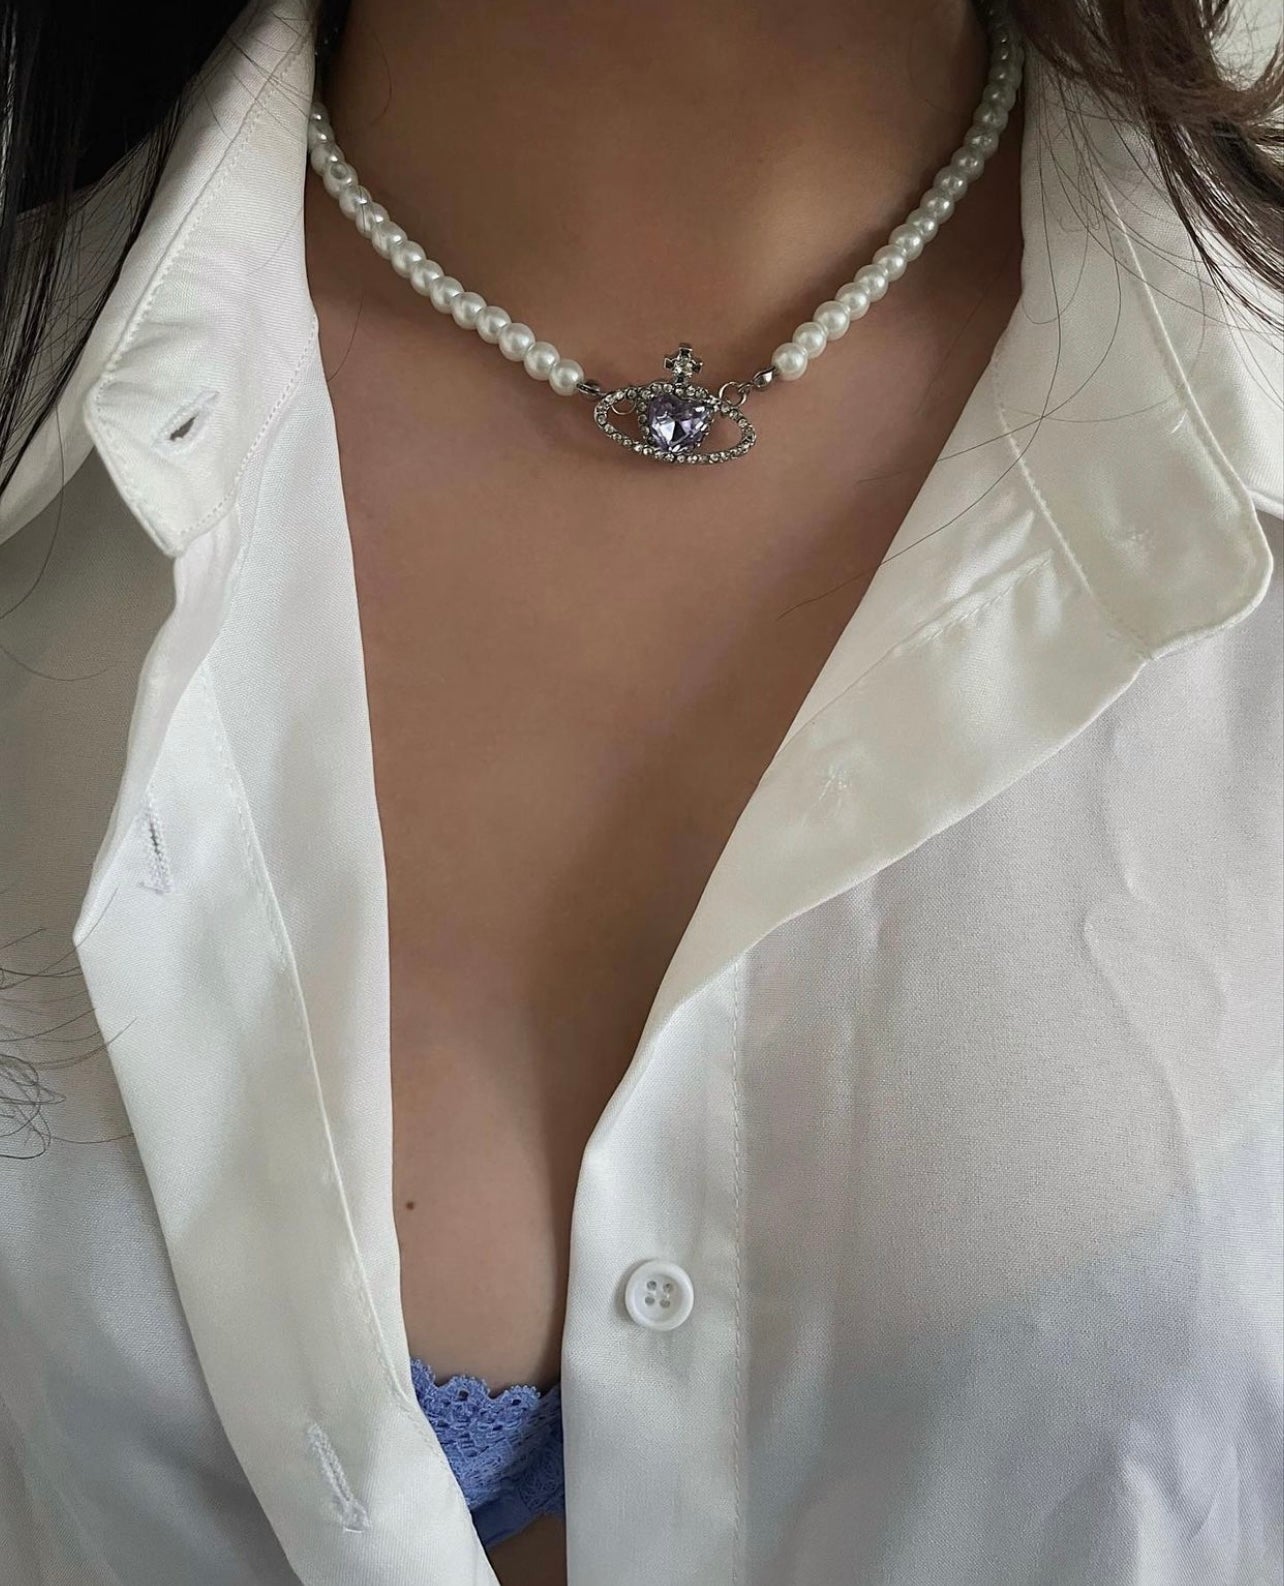 Vivienne Empress Dowager Full Diamond Saturn Pearl Pin Pearl Necklace  Designs High Version, Perfect Gift For Women From Pradfashionjewelry,  $25.63 | DHgate.Com